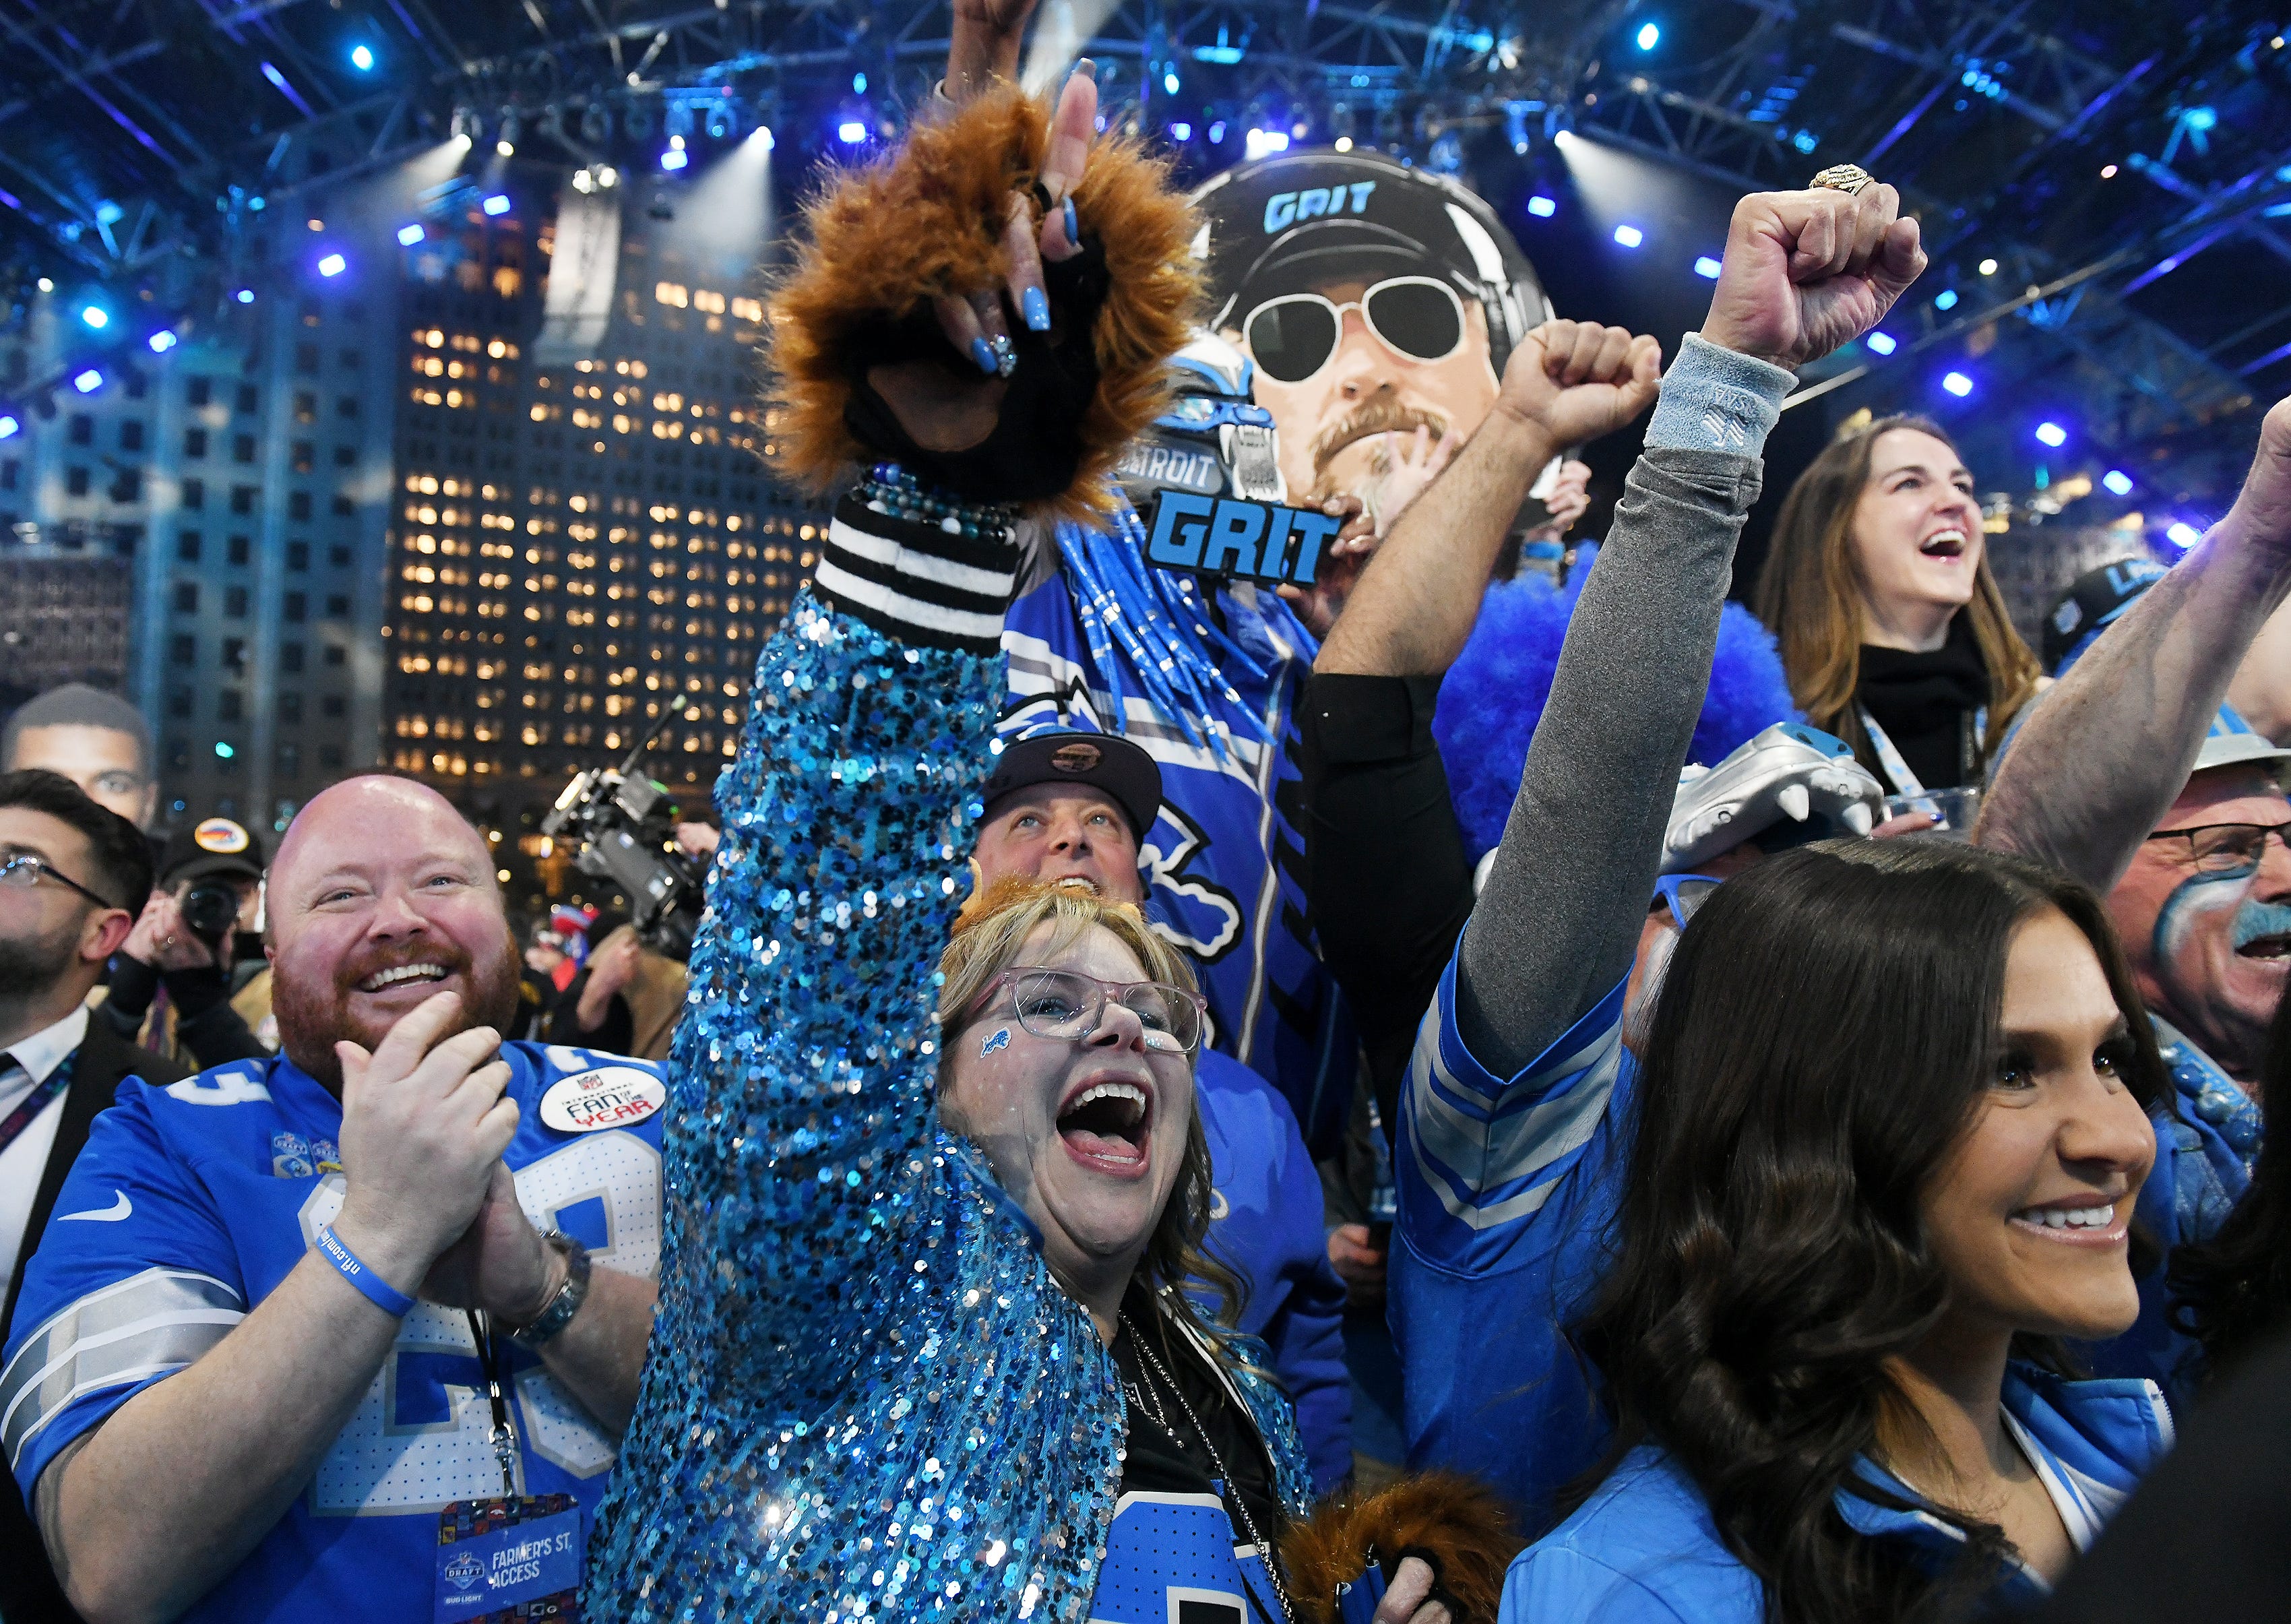 Lions fans react to the pick of Alabama cornerback Terrion Arnold in the first round of the NFL Draft in Detroit.